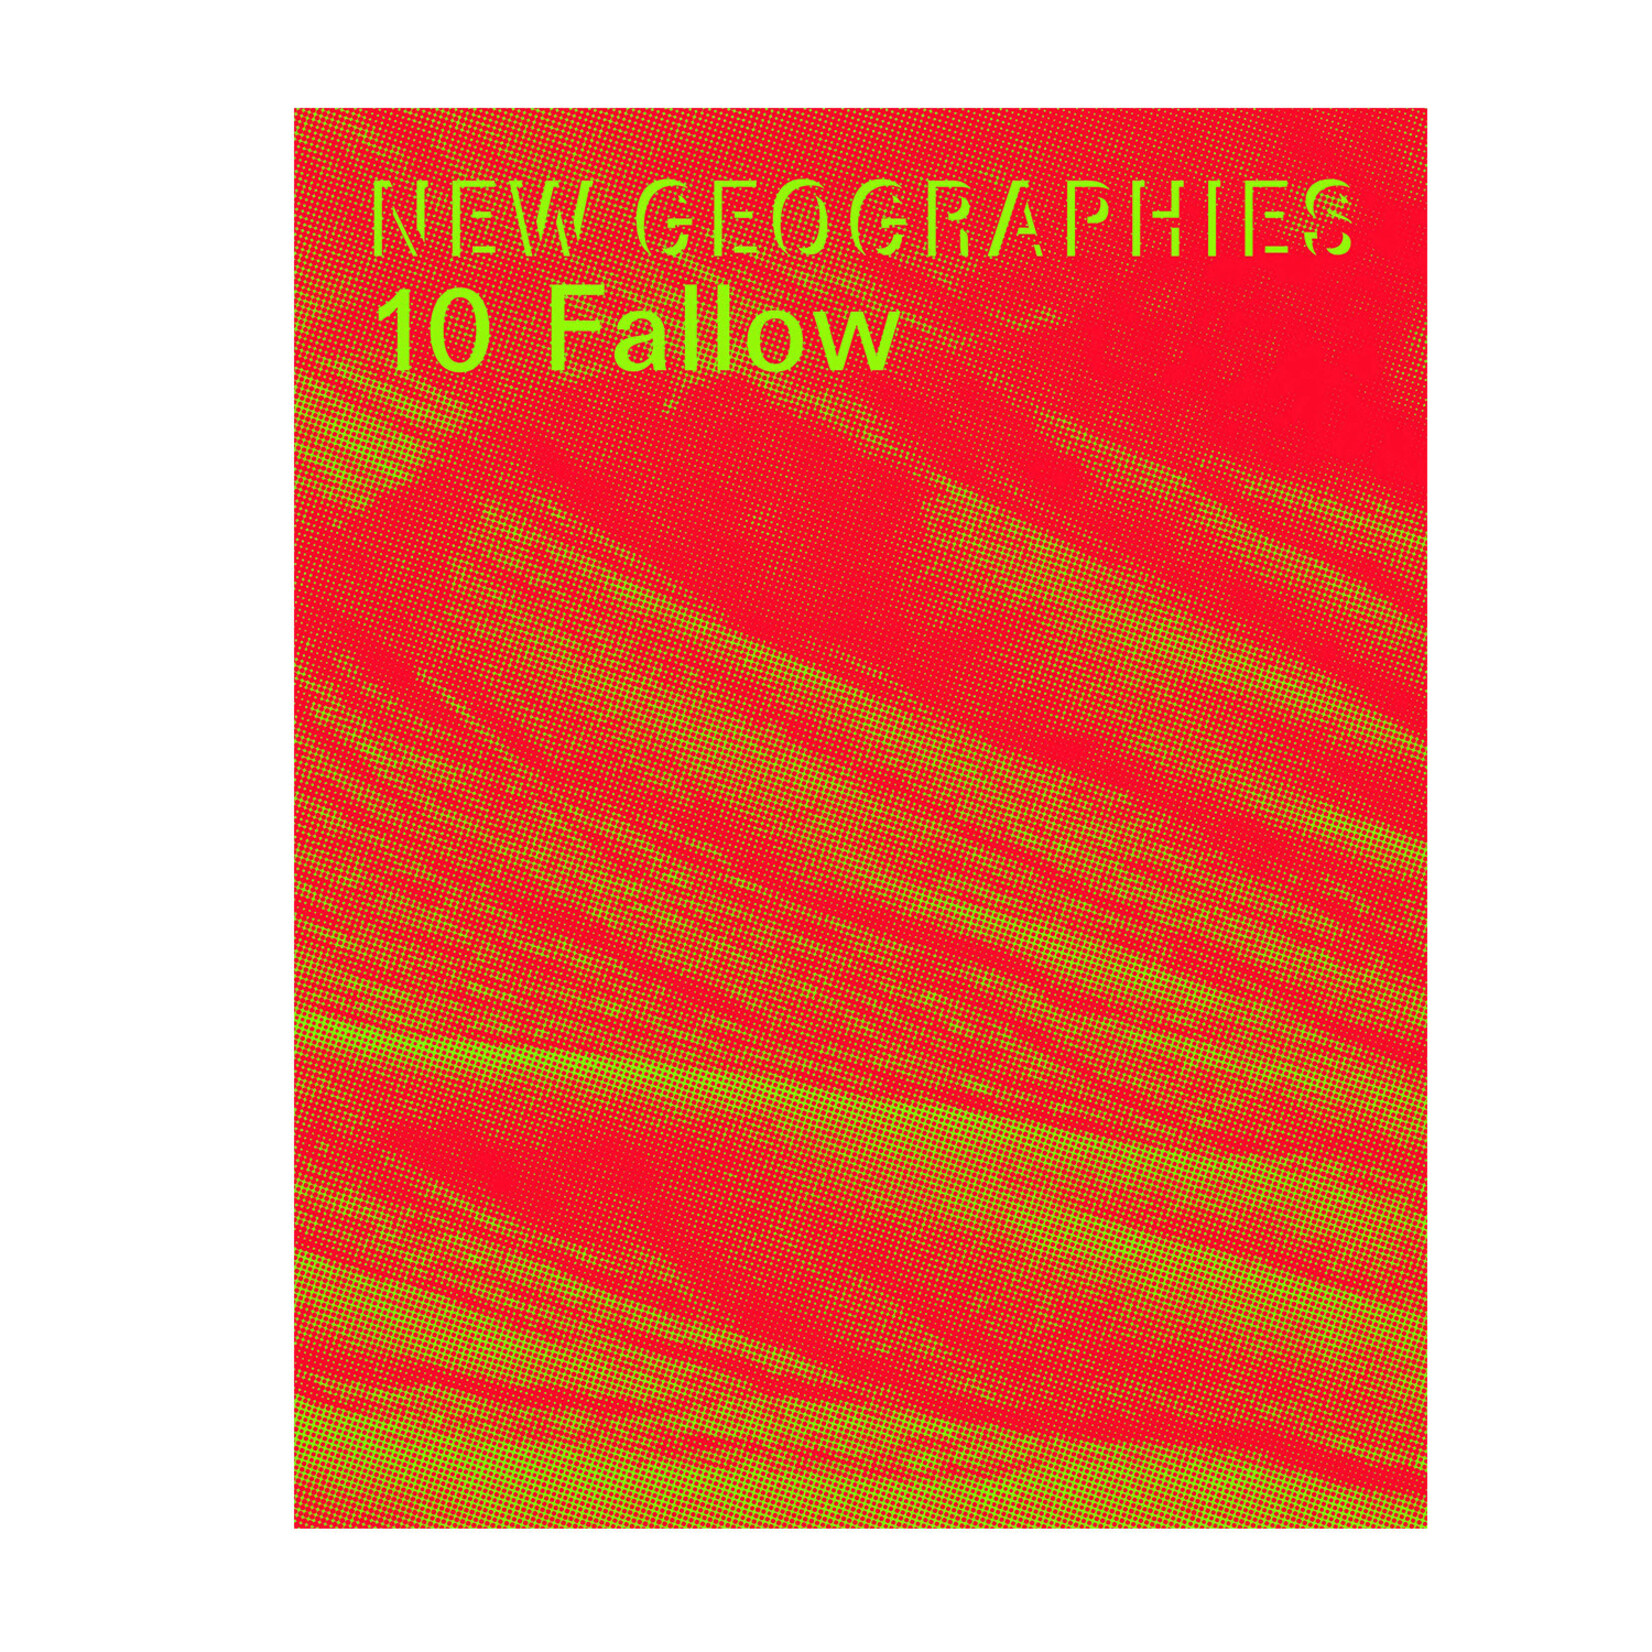 New Geographies 10, Fallow